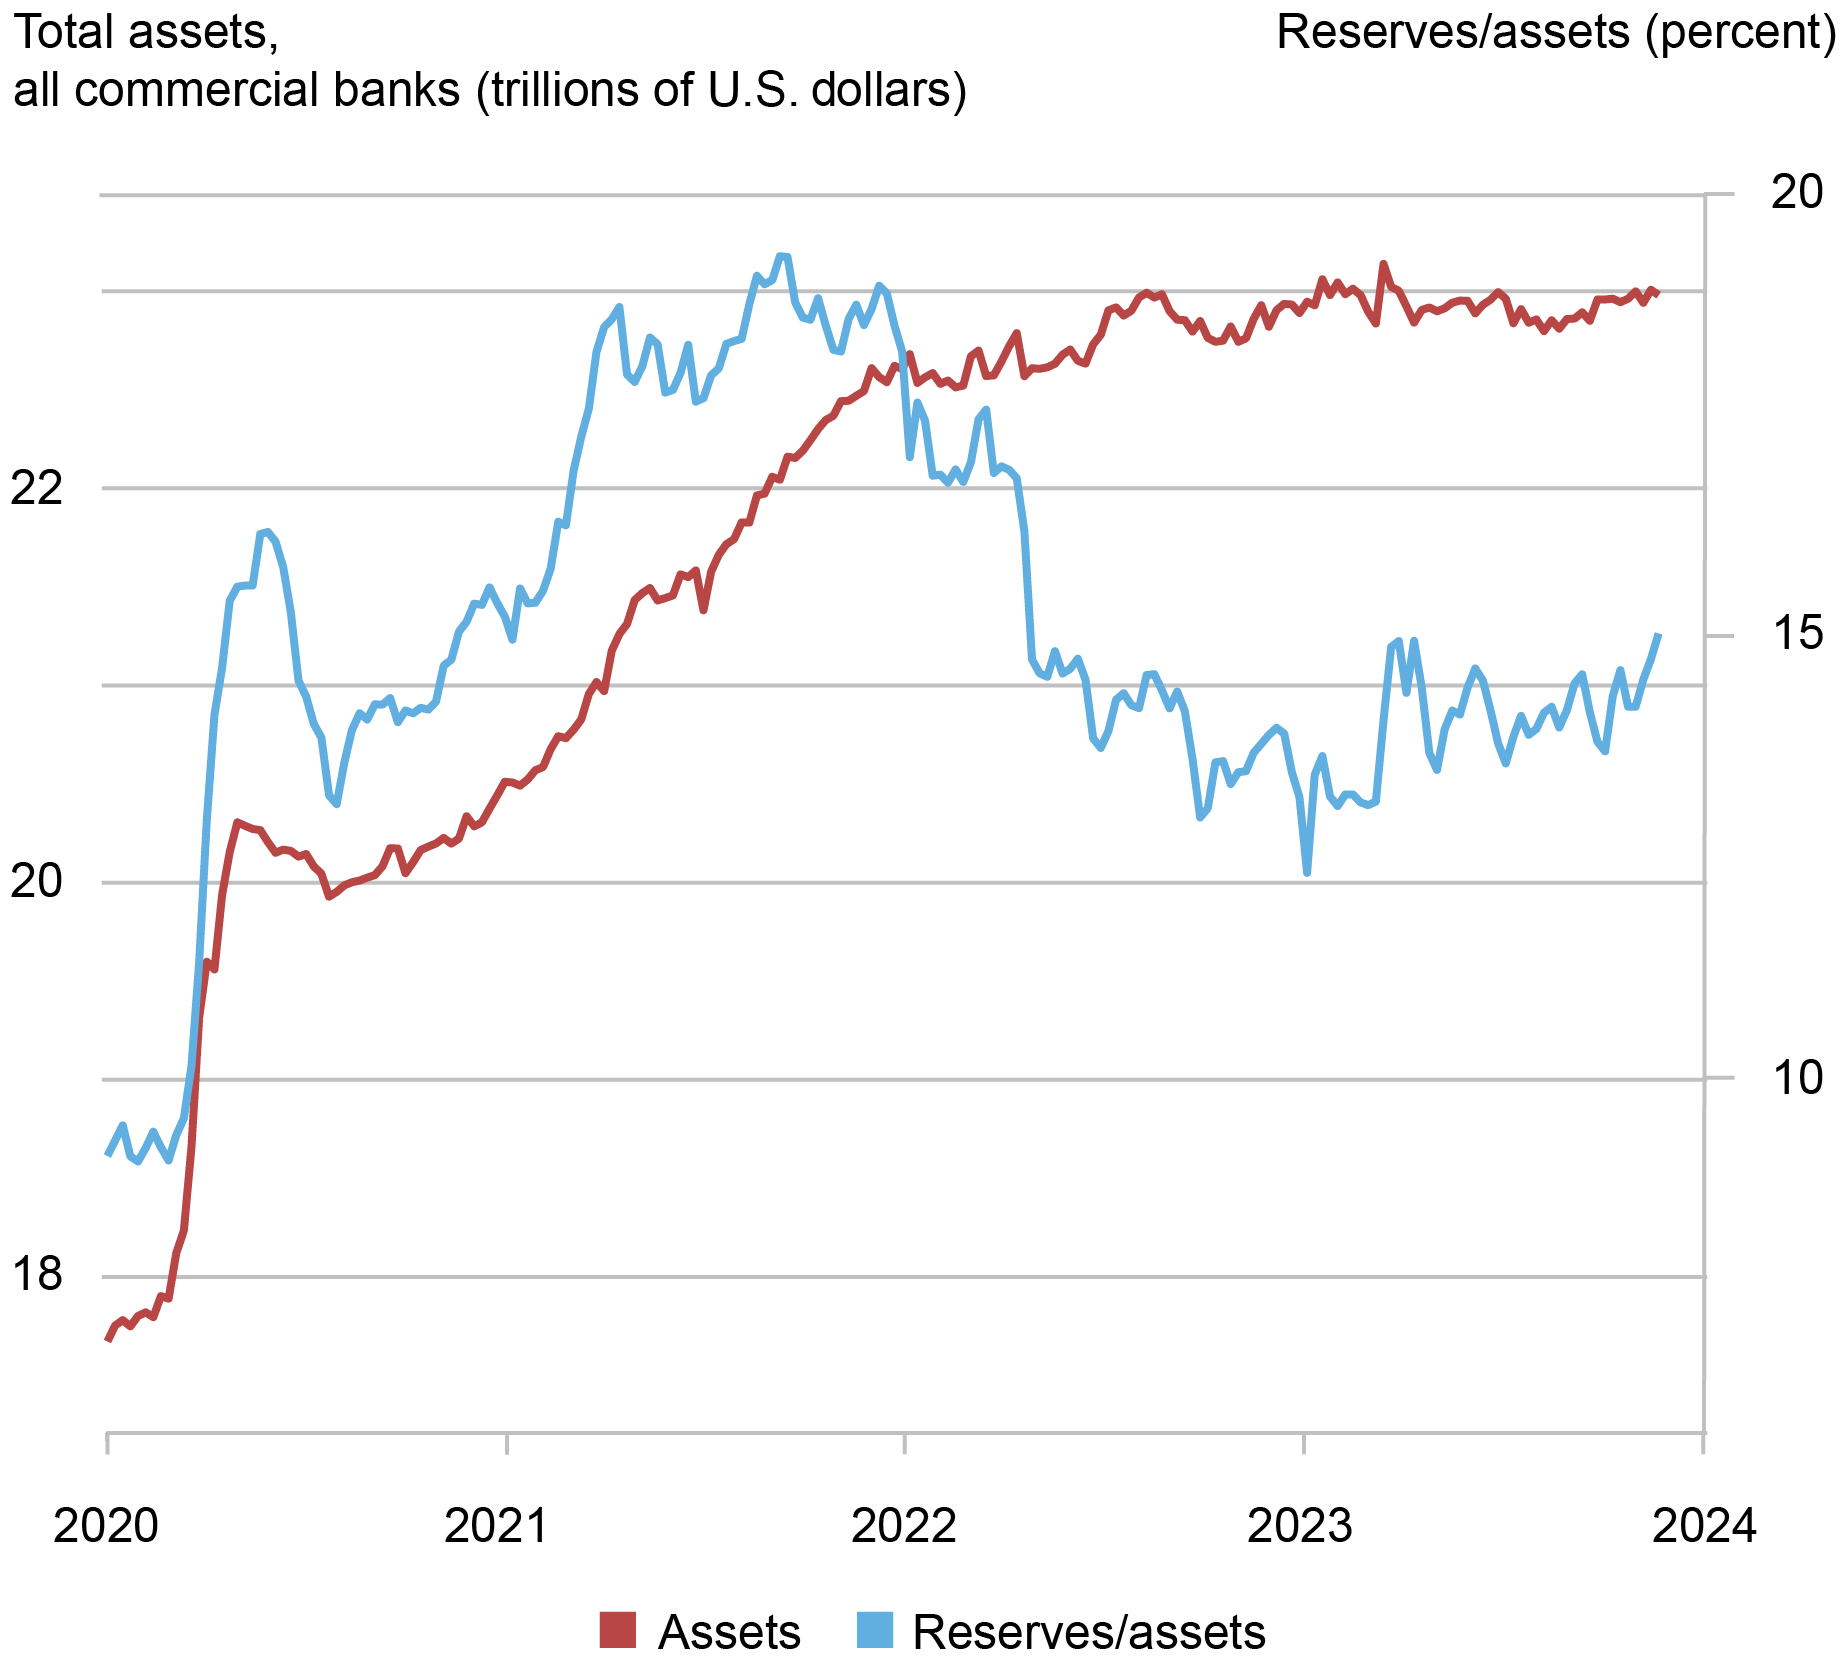  A two-line chart depicts bank assets in red and the ratio of bank reserves to assets in blue from 2020 to late 2023. Since June 2023, bank assets have hovered around $23 trillion, slightly below their March 2023 peak. Moreover, reserves have been around 14 percent of bank assets since June 2023.